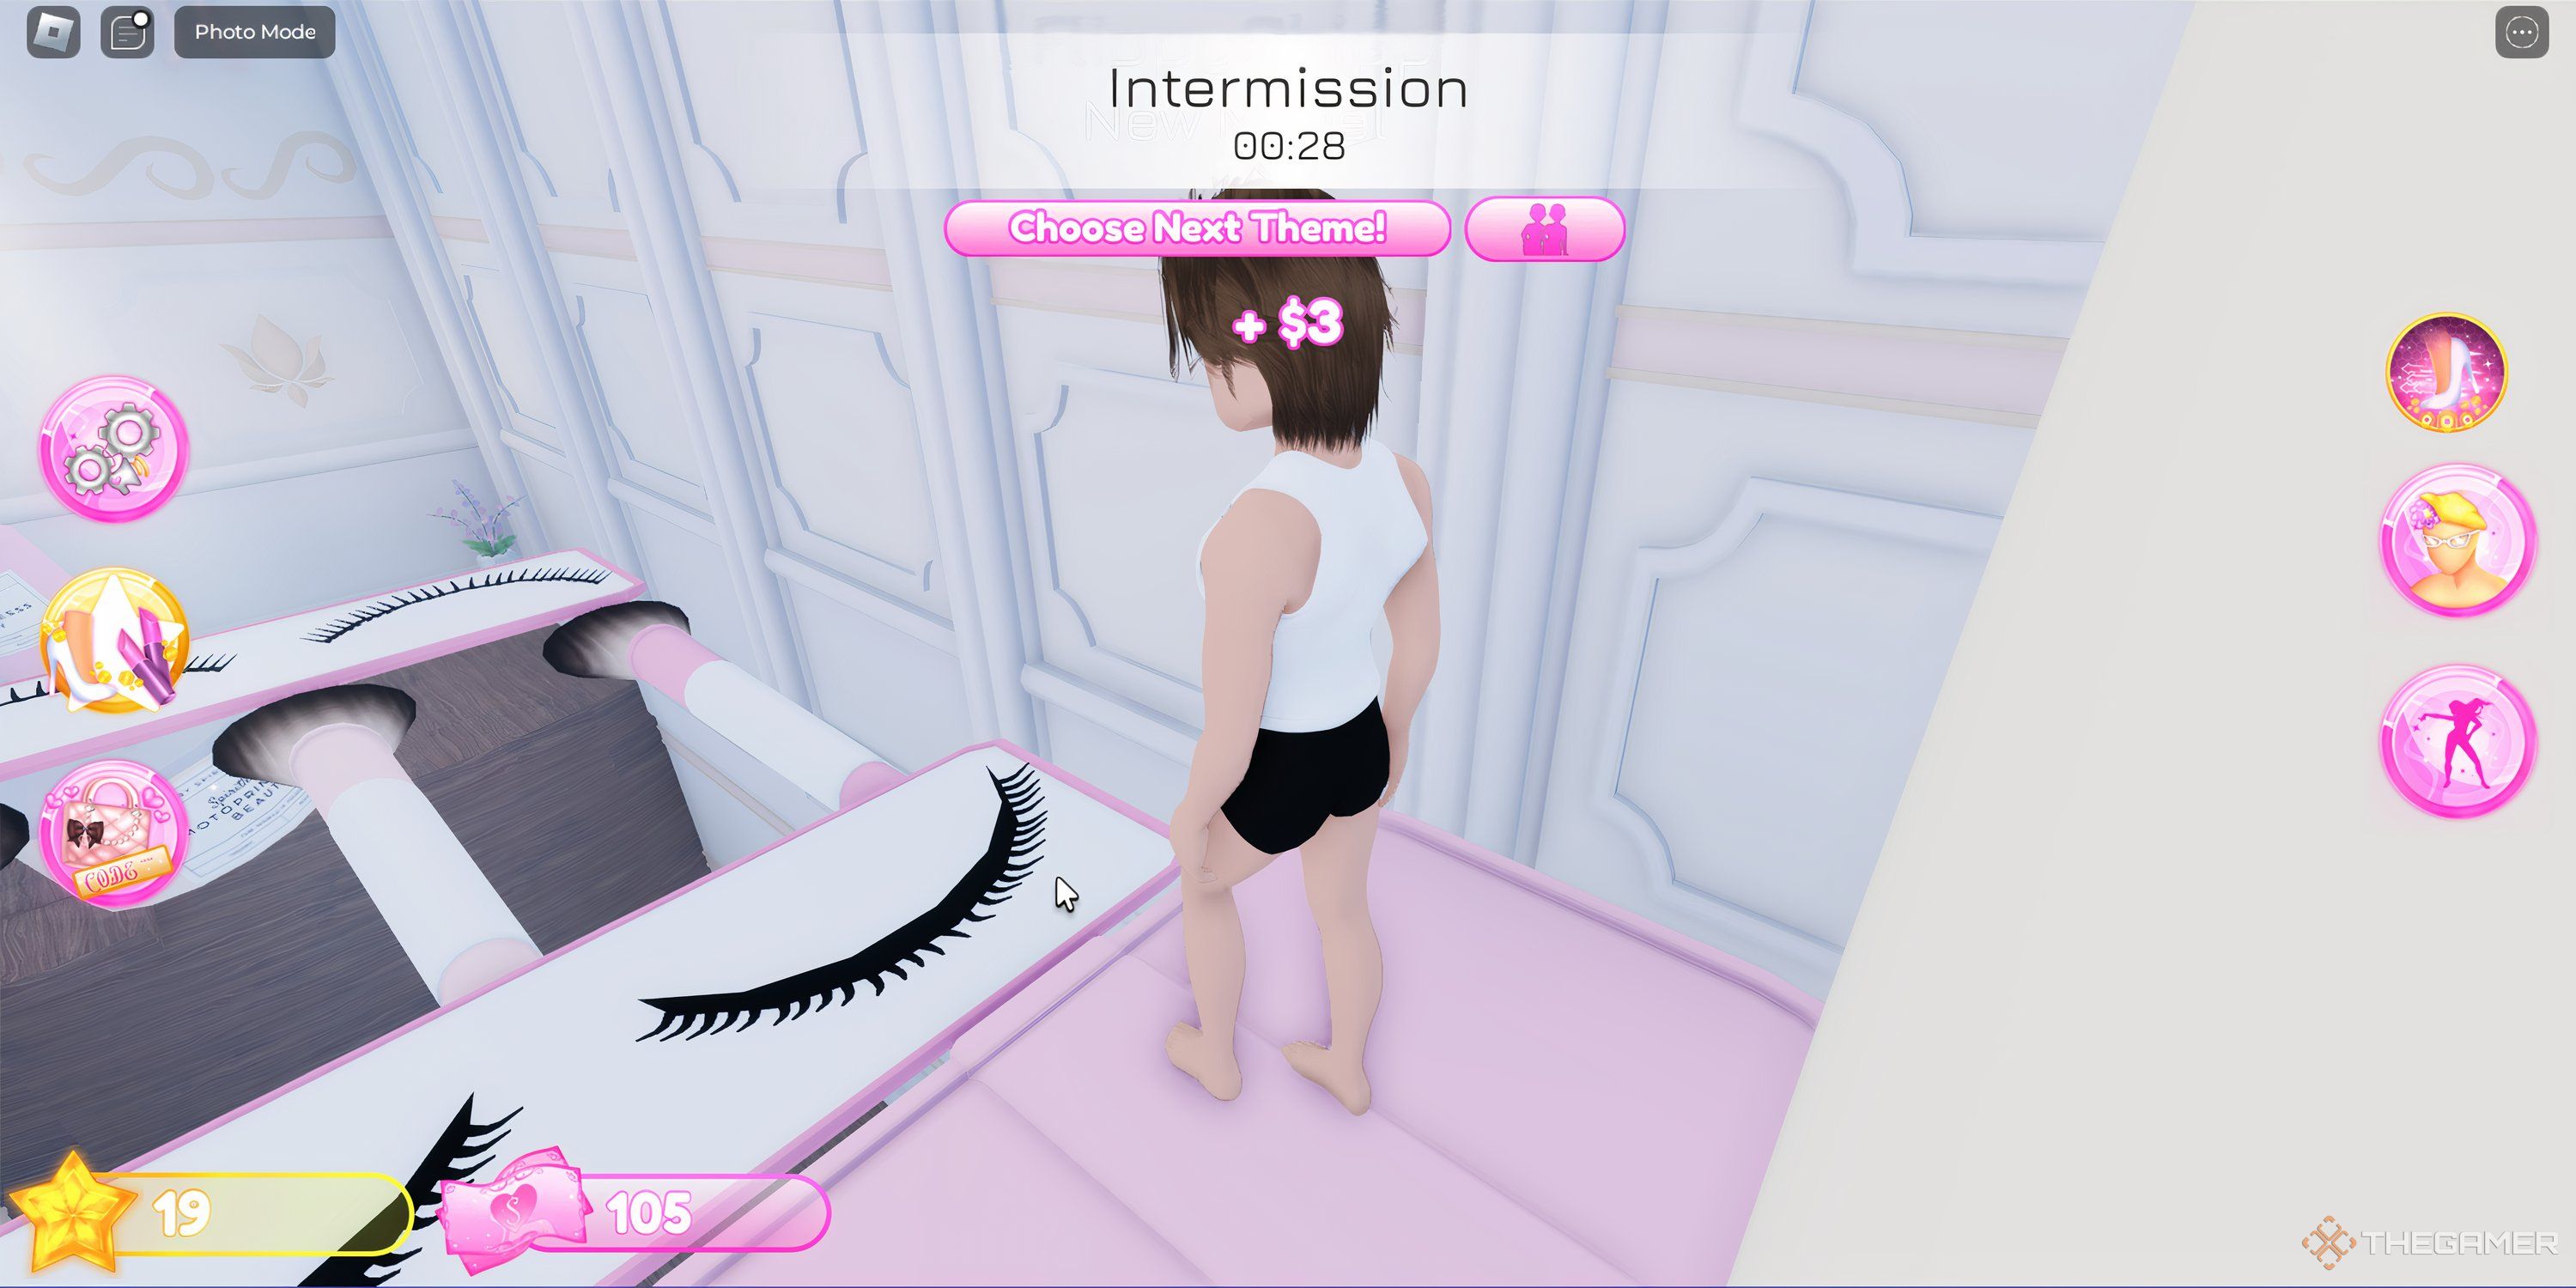 A Roblox model attempts to travel across an obstacle course made of oversized makeup brushes and false eyelashes in Dress To Impress